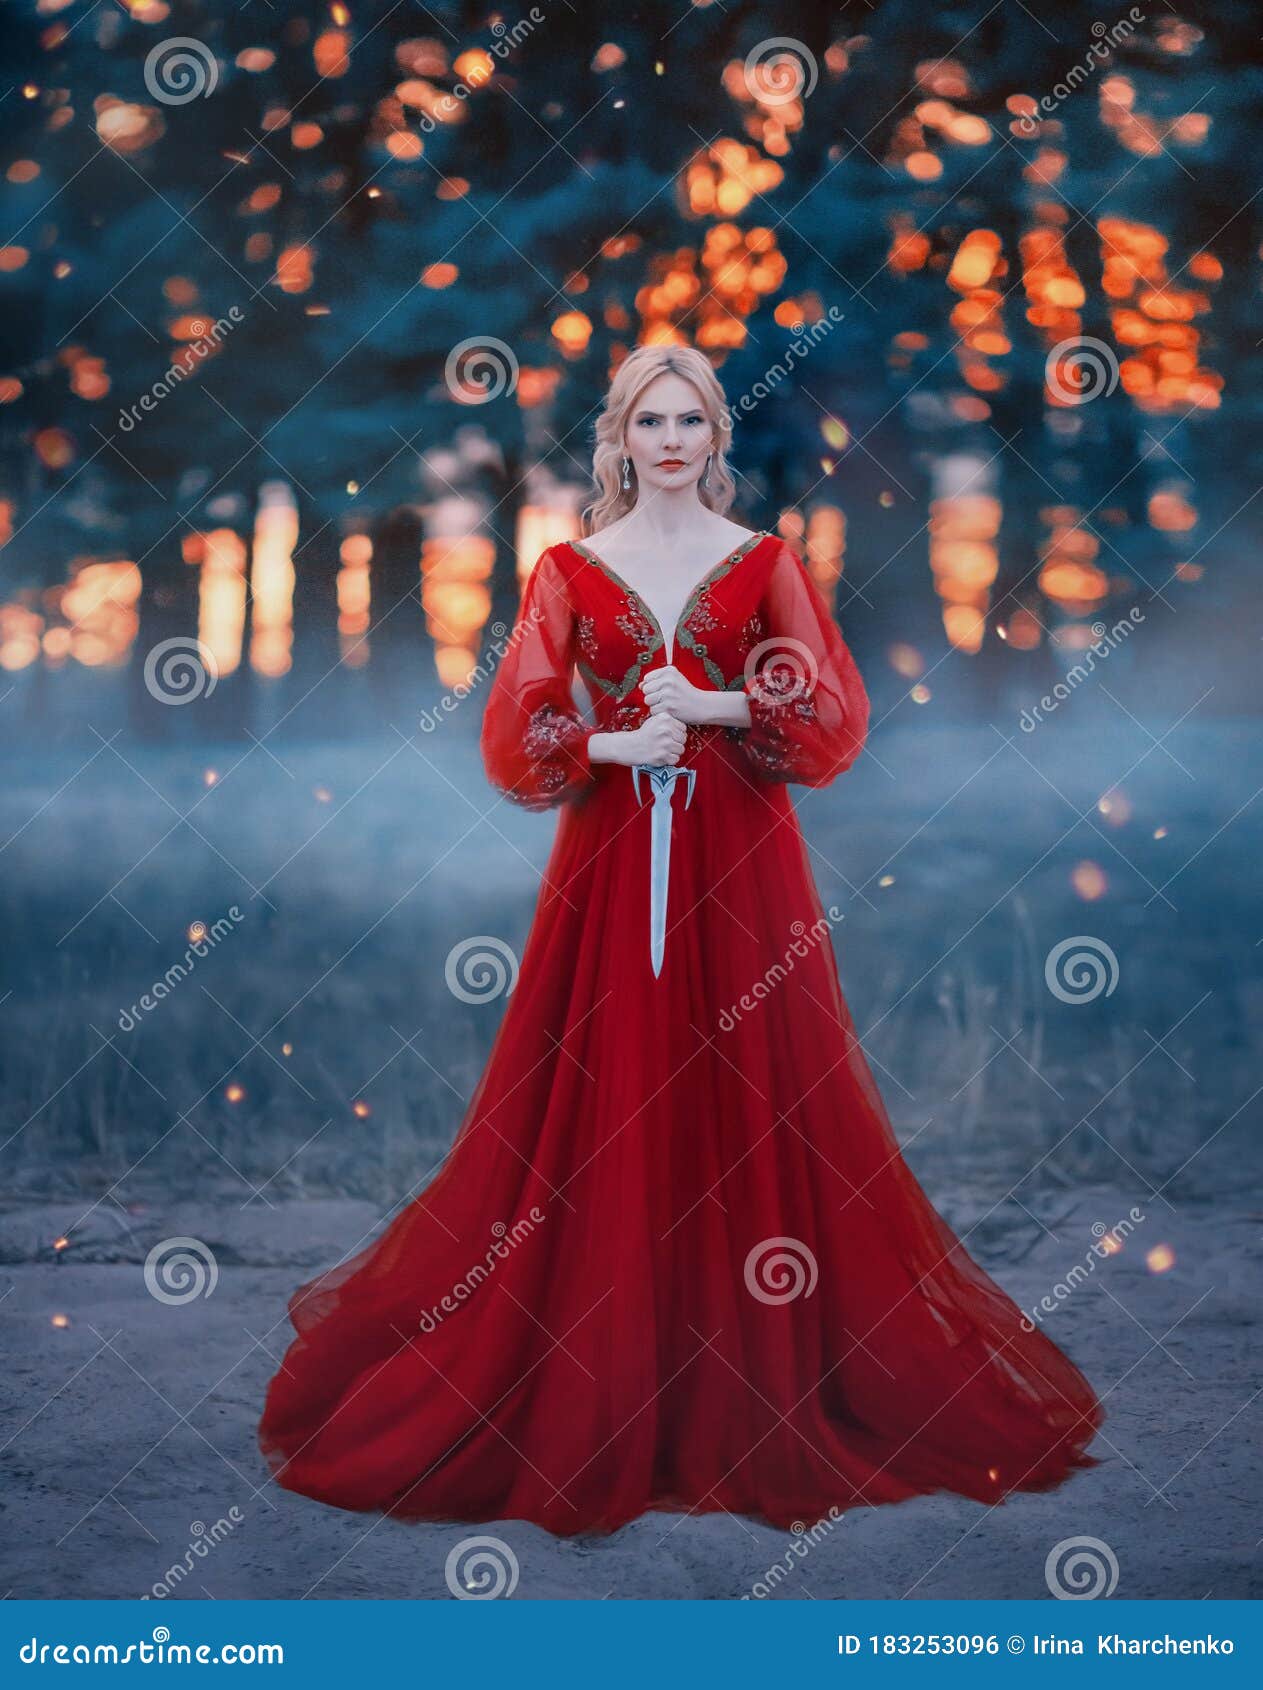 Beautiful, Dangerous Blonde Queen in a Red Fashion Lush Dress with